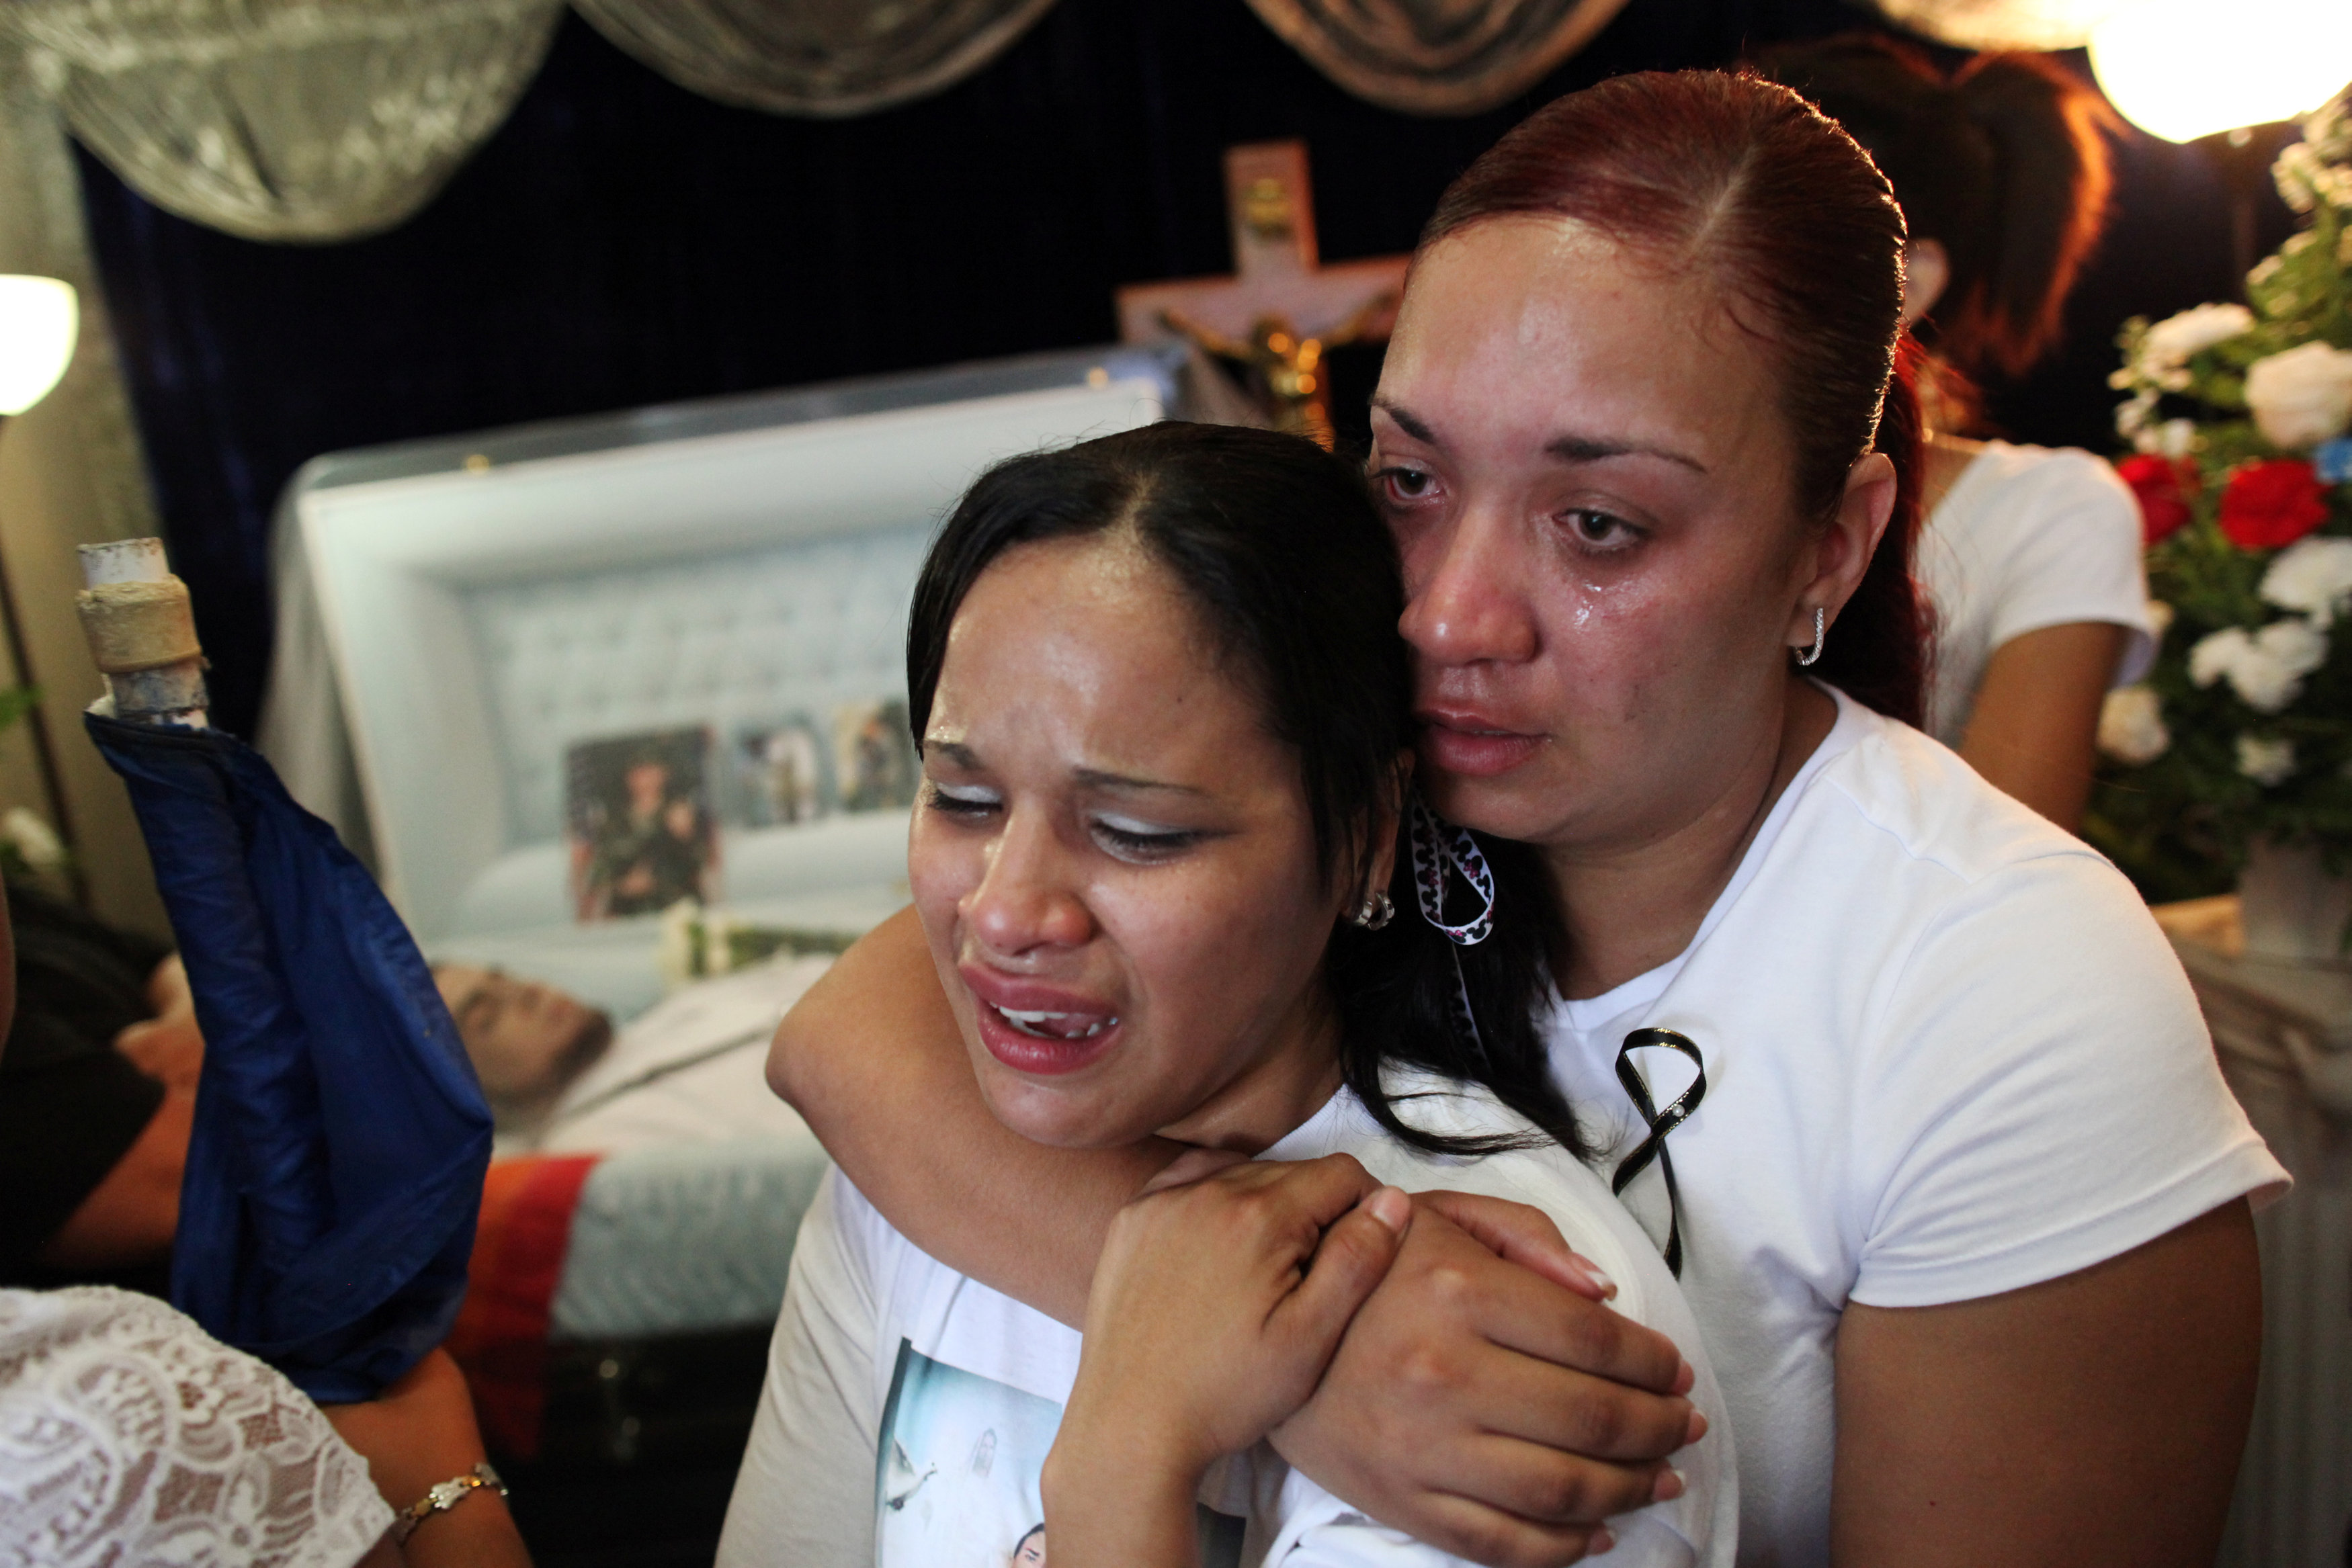 Women cry near the body of Angel Candelairo Padro during his wake June 17 in his hometown of Guanica, Puerto Rico. Candelario was of the victims of the June 12 mass shooting at the Pulse nightclub in Orlando, Fla. (CNS/Alvin Baez, Reuters)